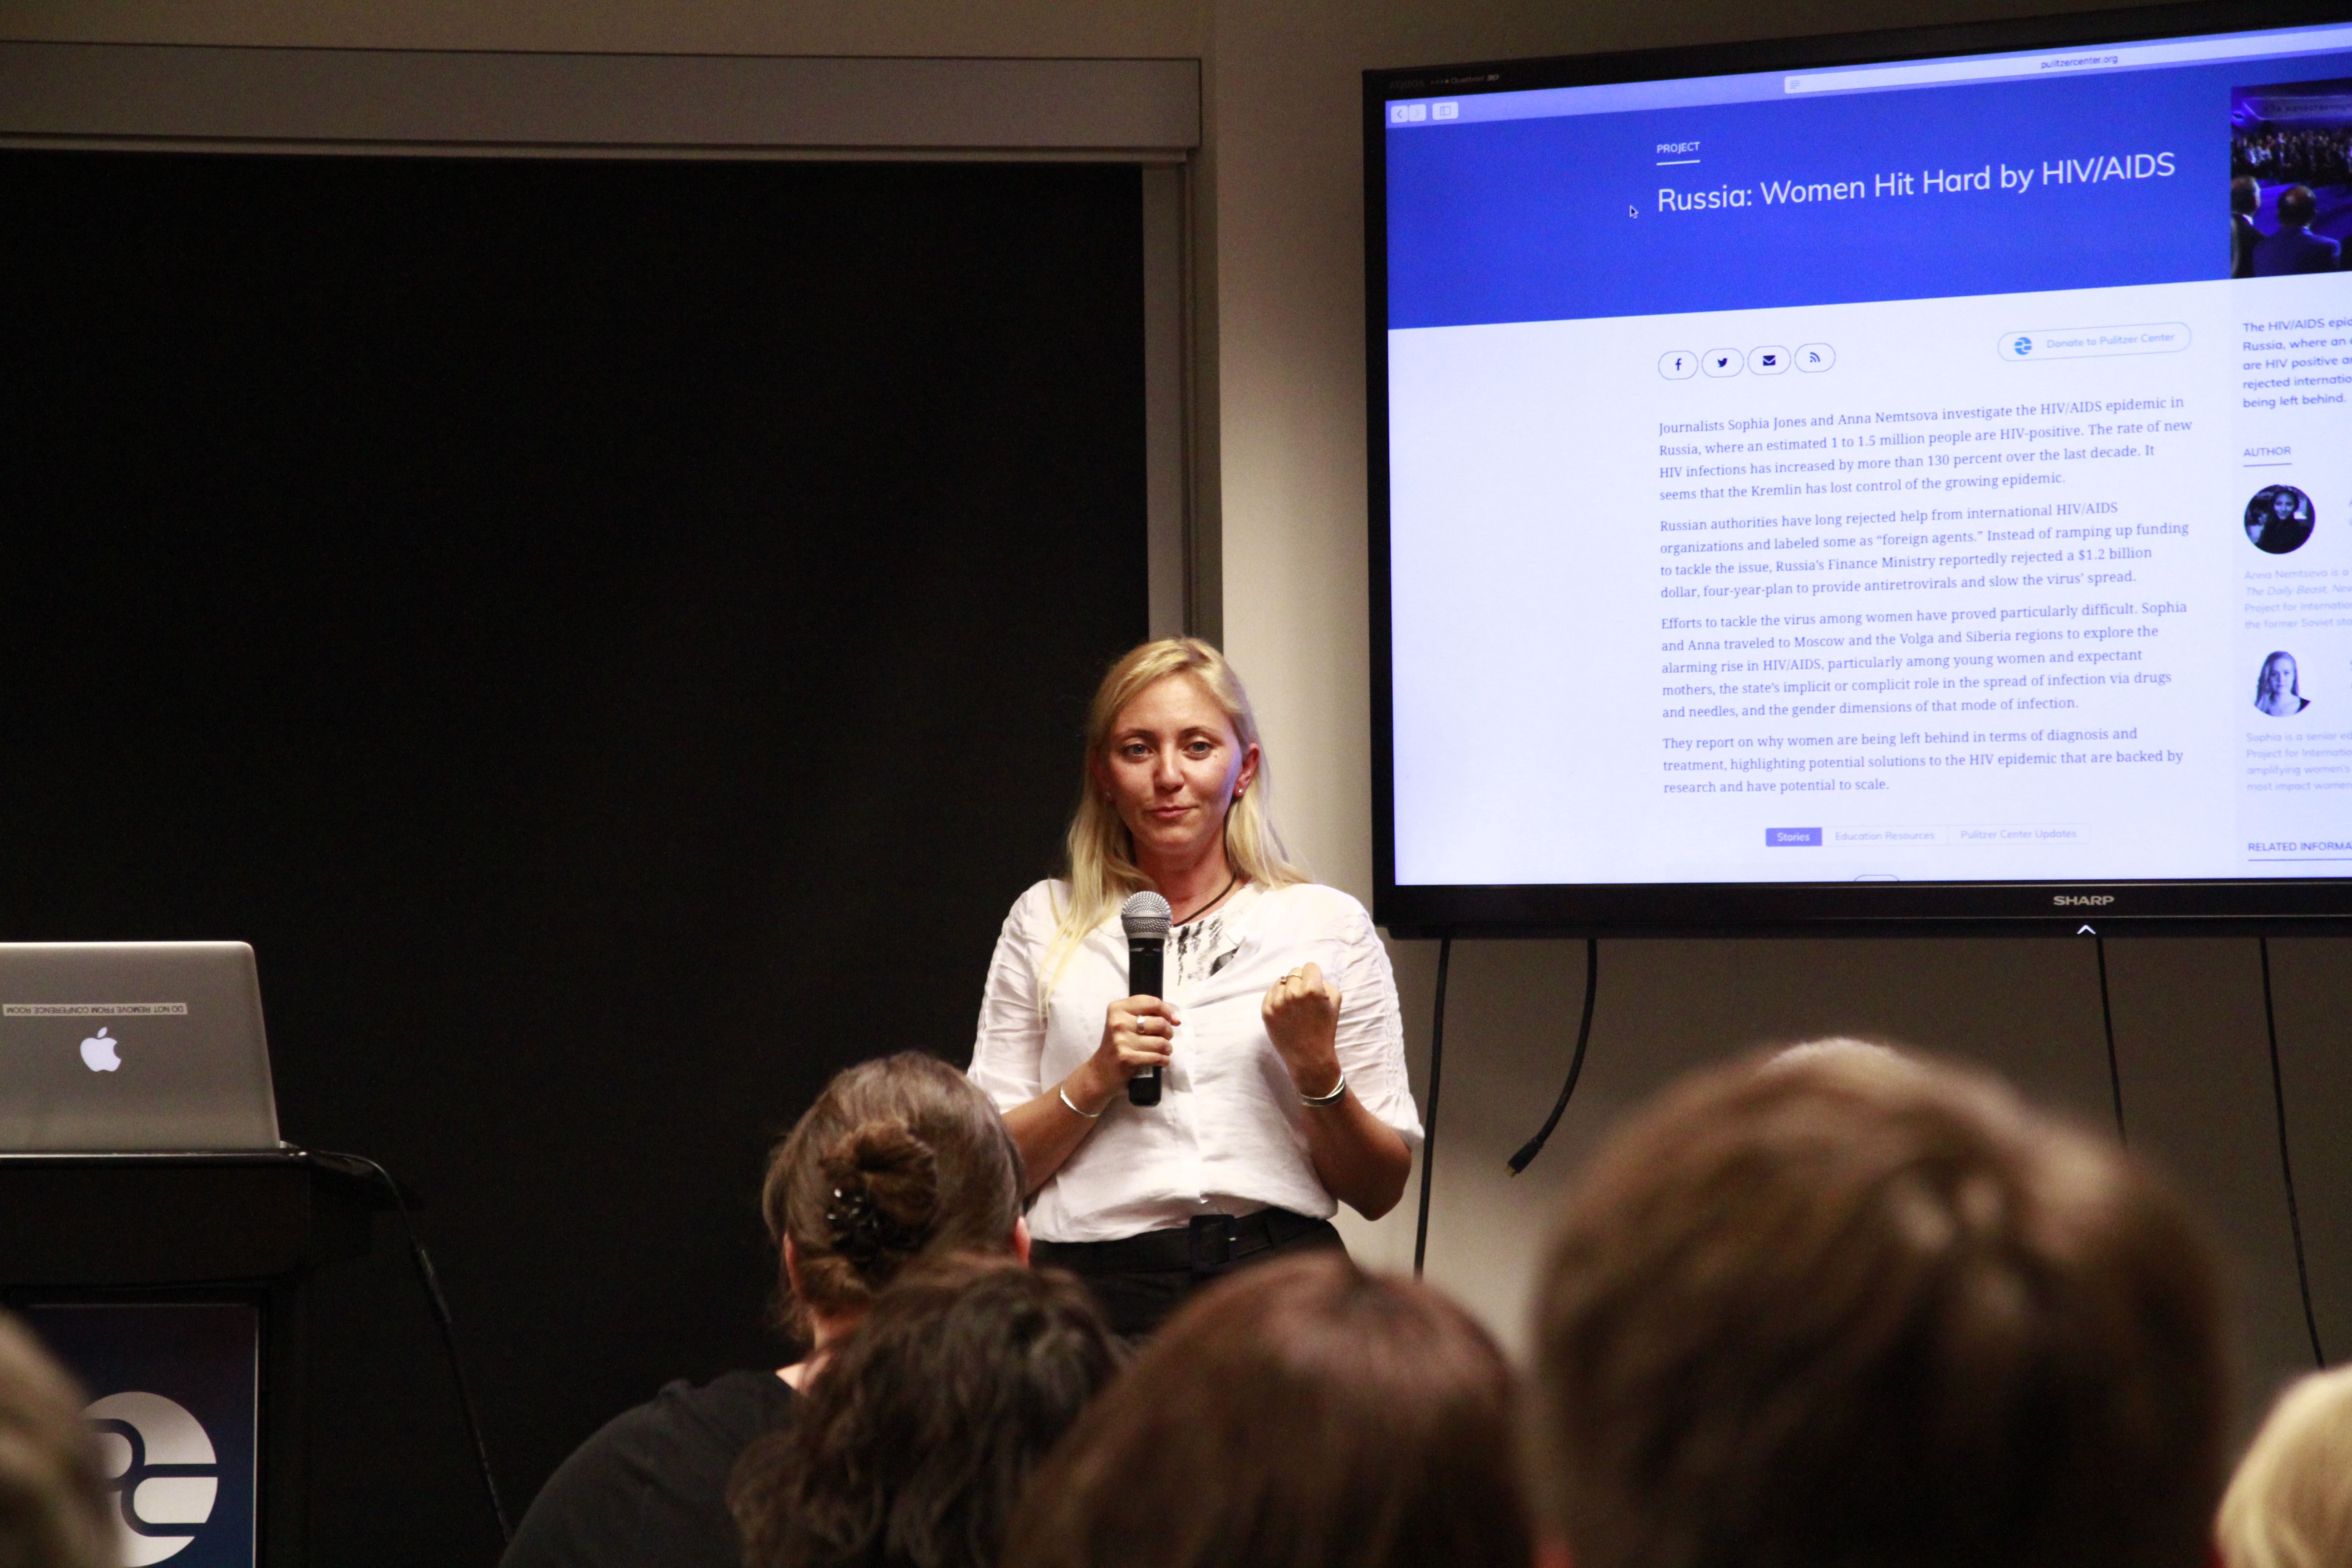 Anna Nemtsova talks to the audience about the impact of the HIV crisis on women in Russia. Image by Kayla Edwards. United States, 2018.